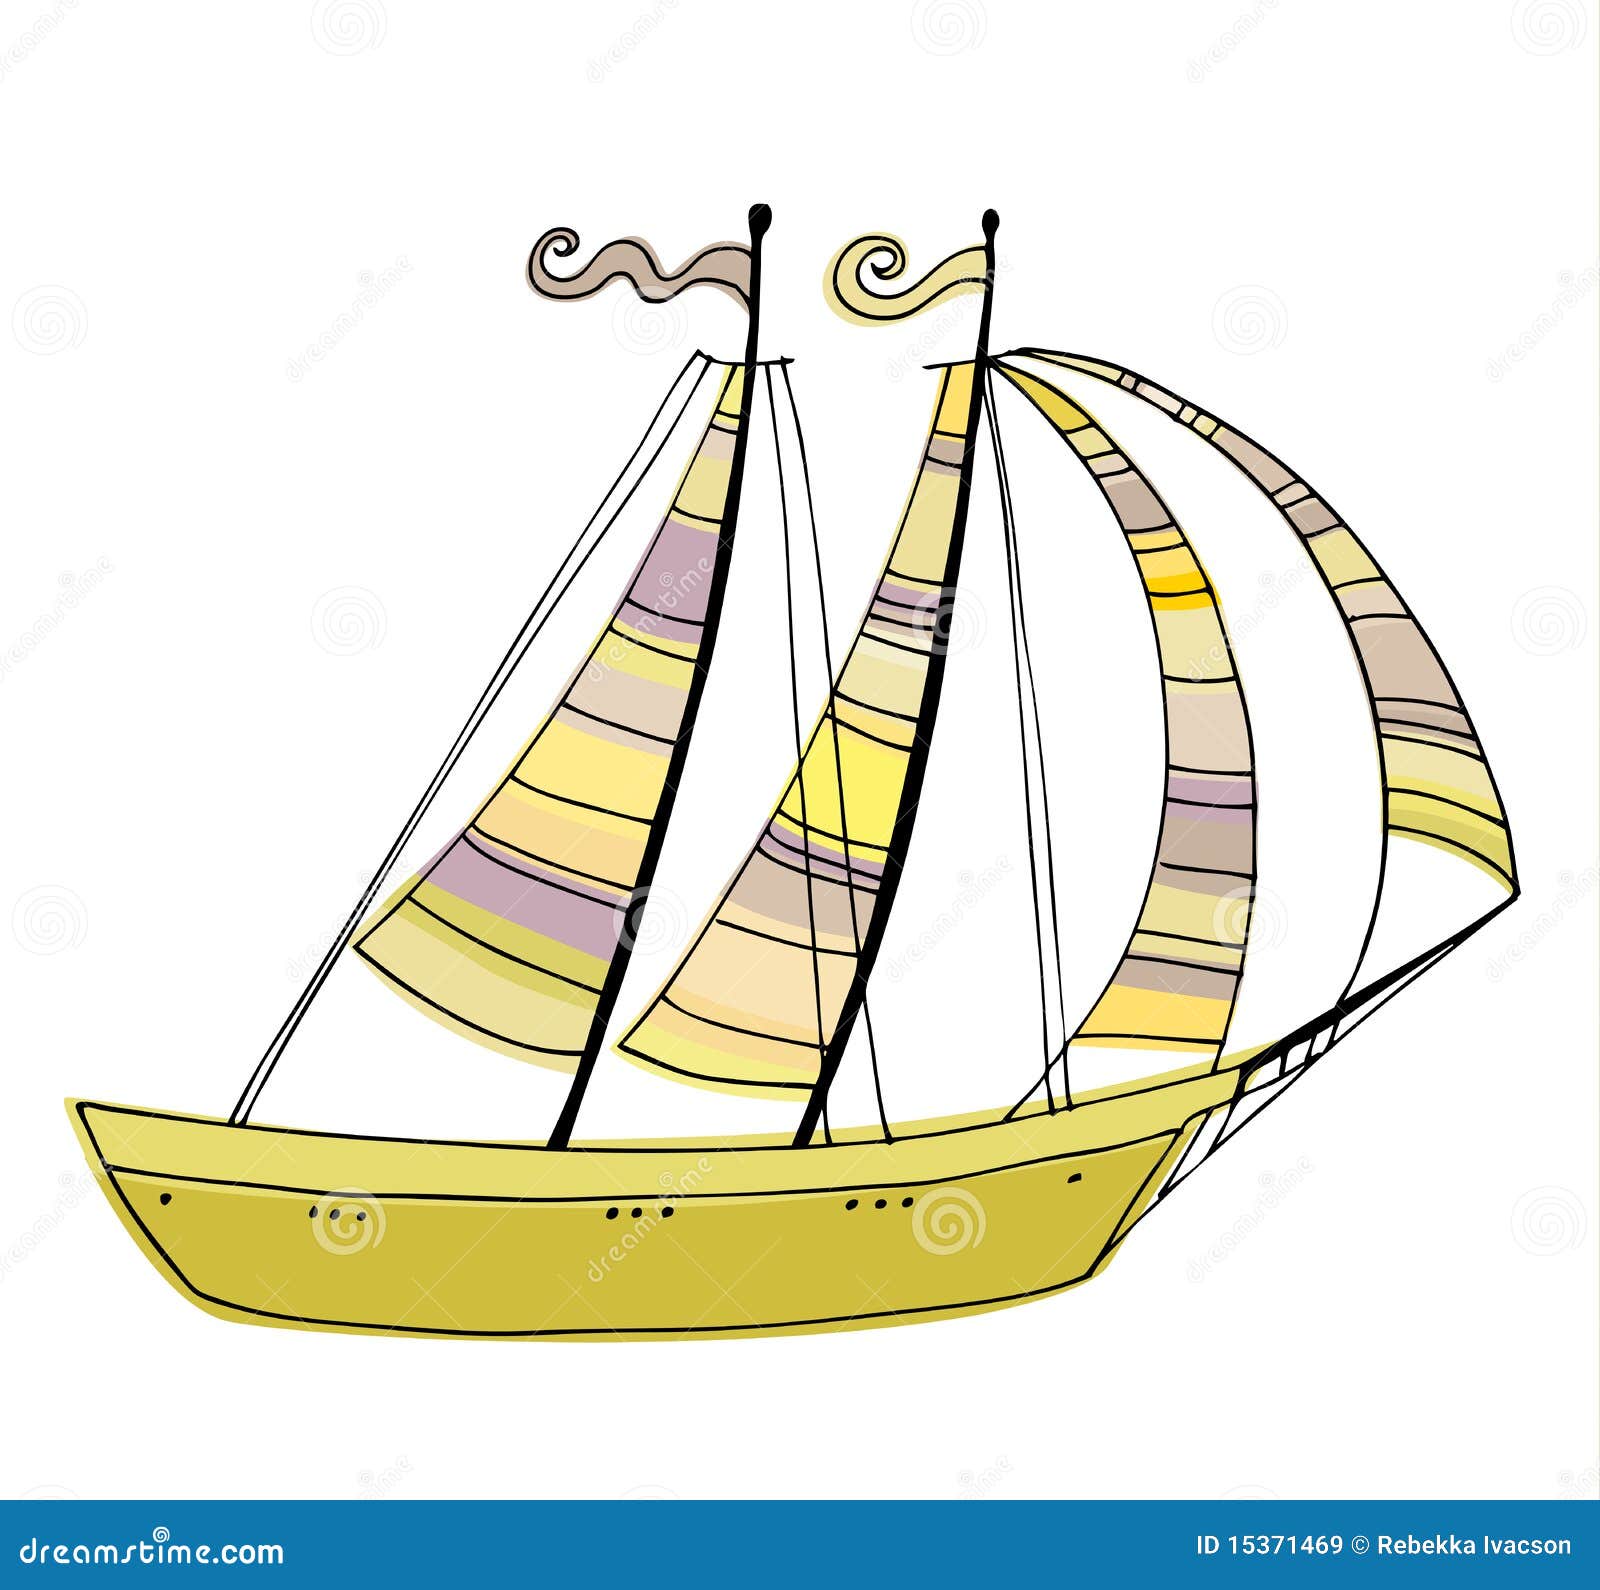 Royalty Free Stock Images: Illustrated cute sailing boat